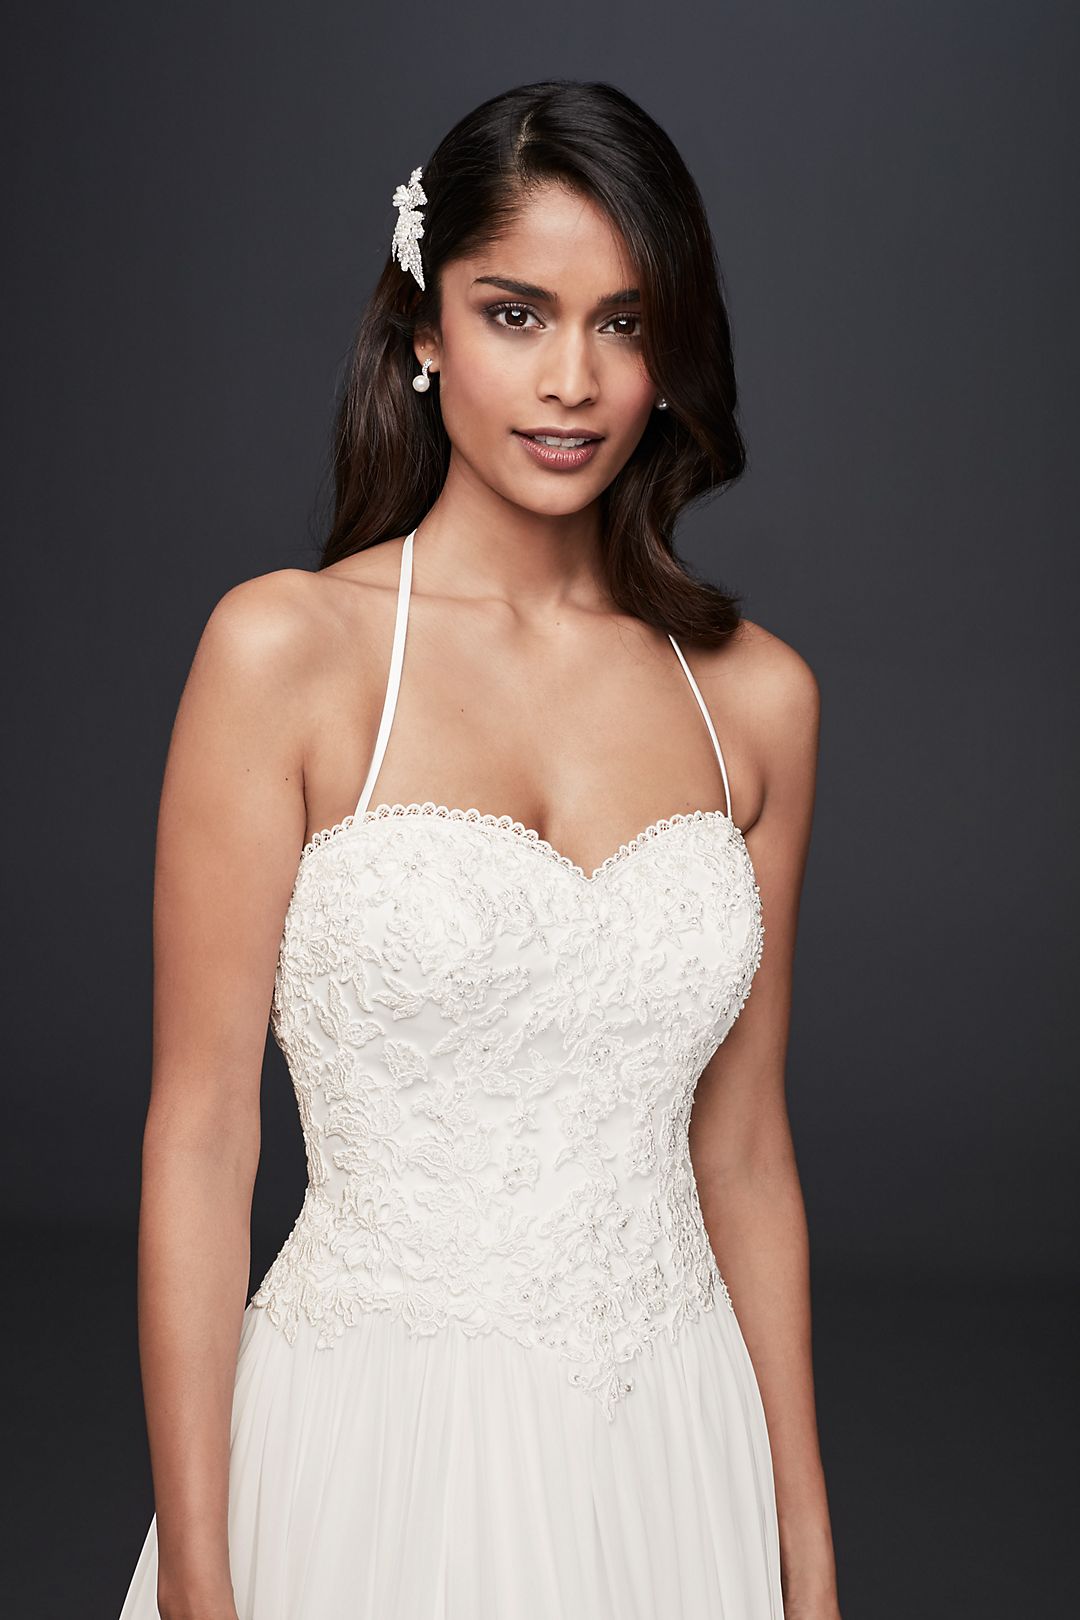 As-Is Basque-Waist Lace and Chiffon Wedding Dress Image 4